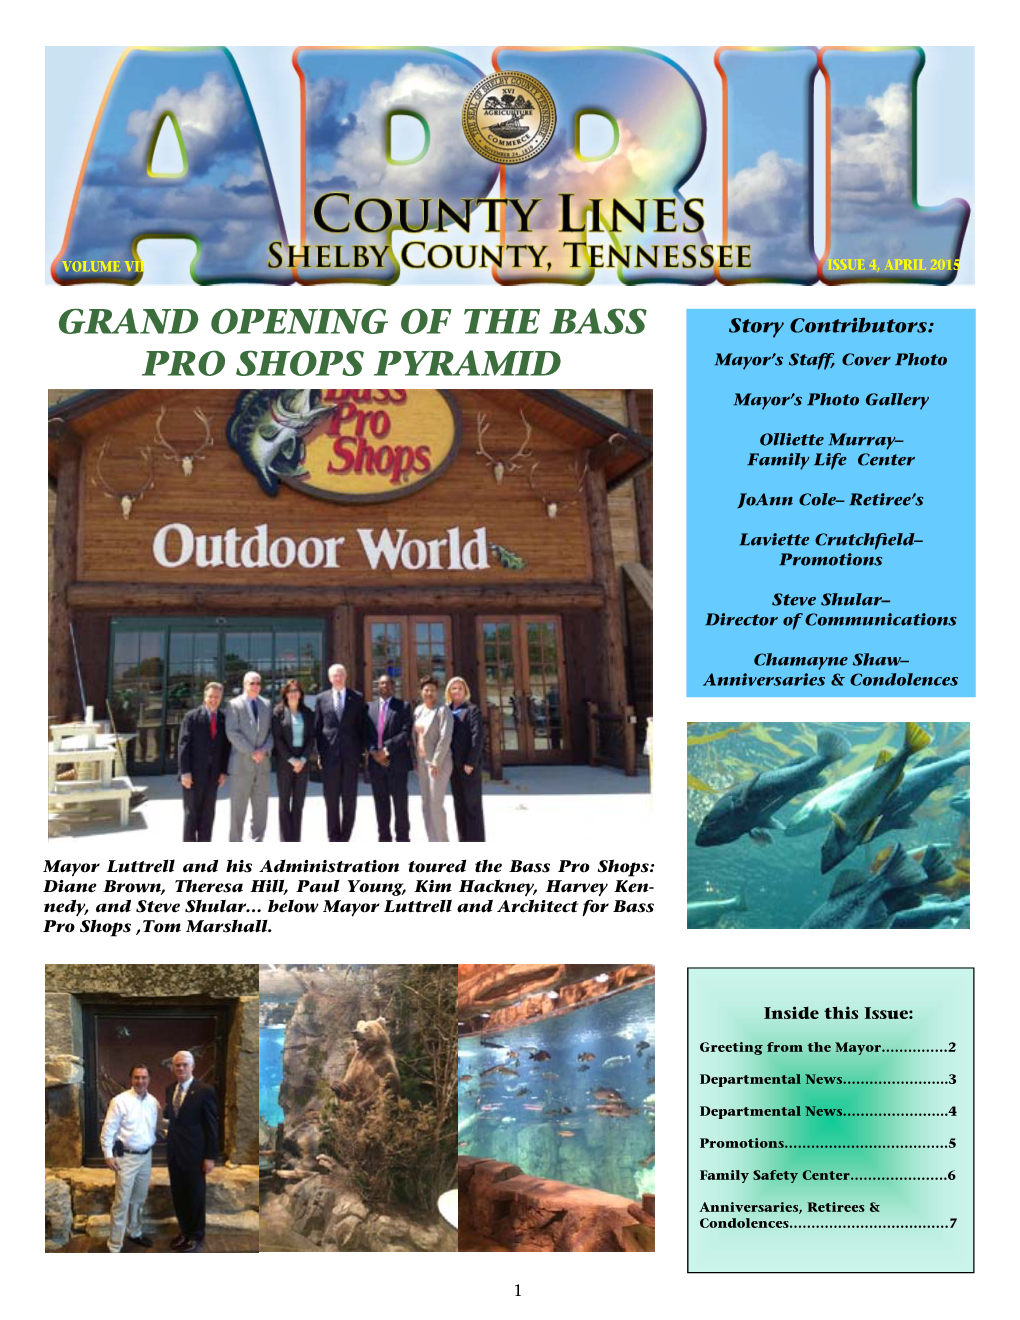 Grand Opening of the Bass Pro Shops Pyramid